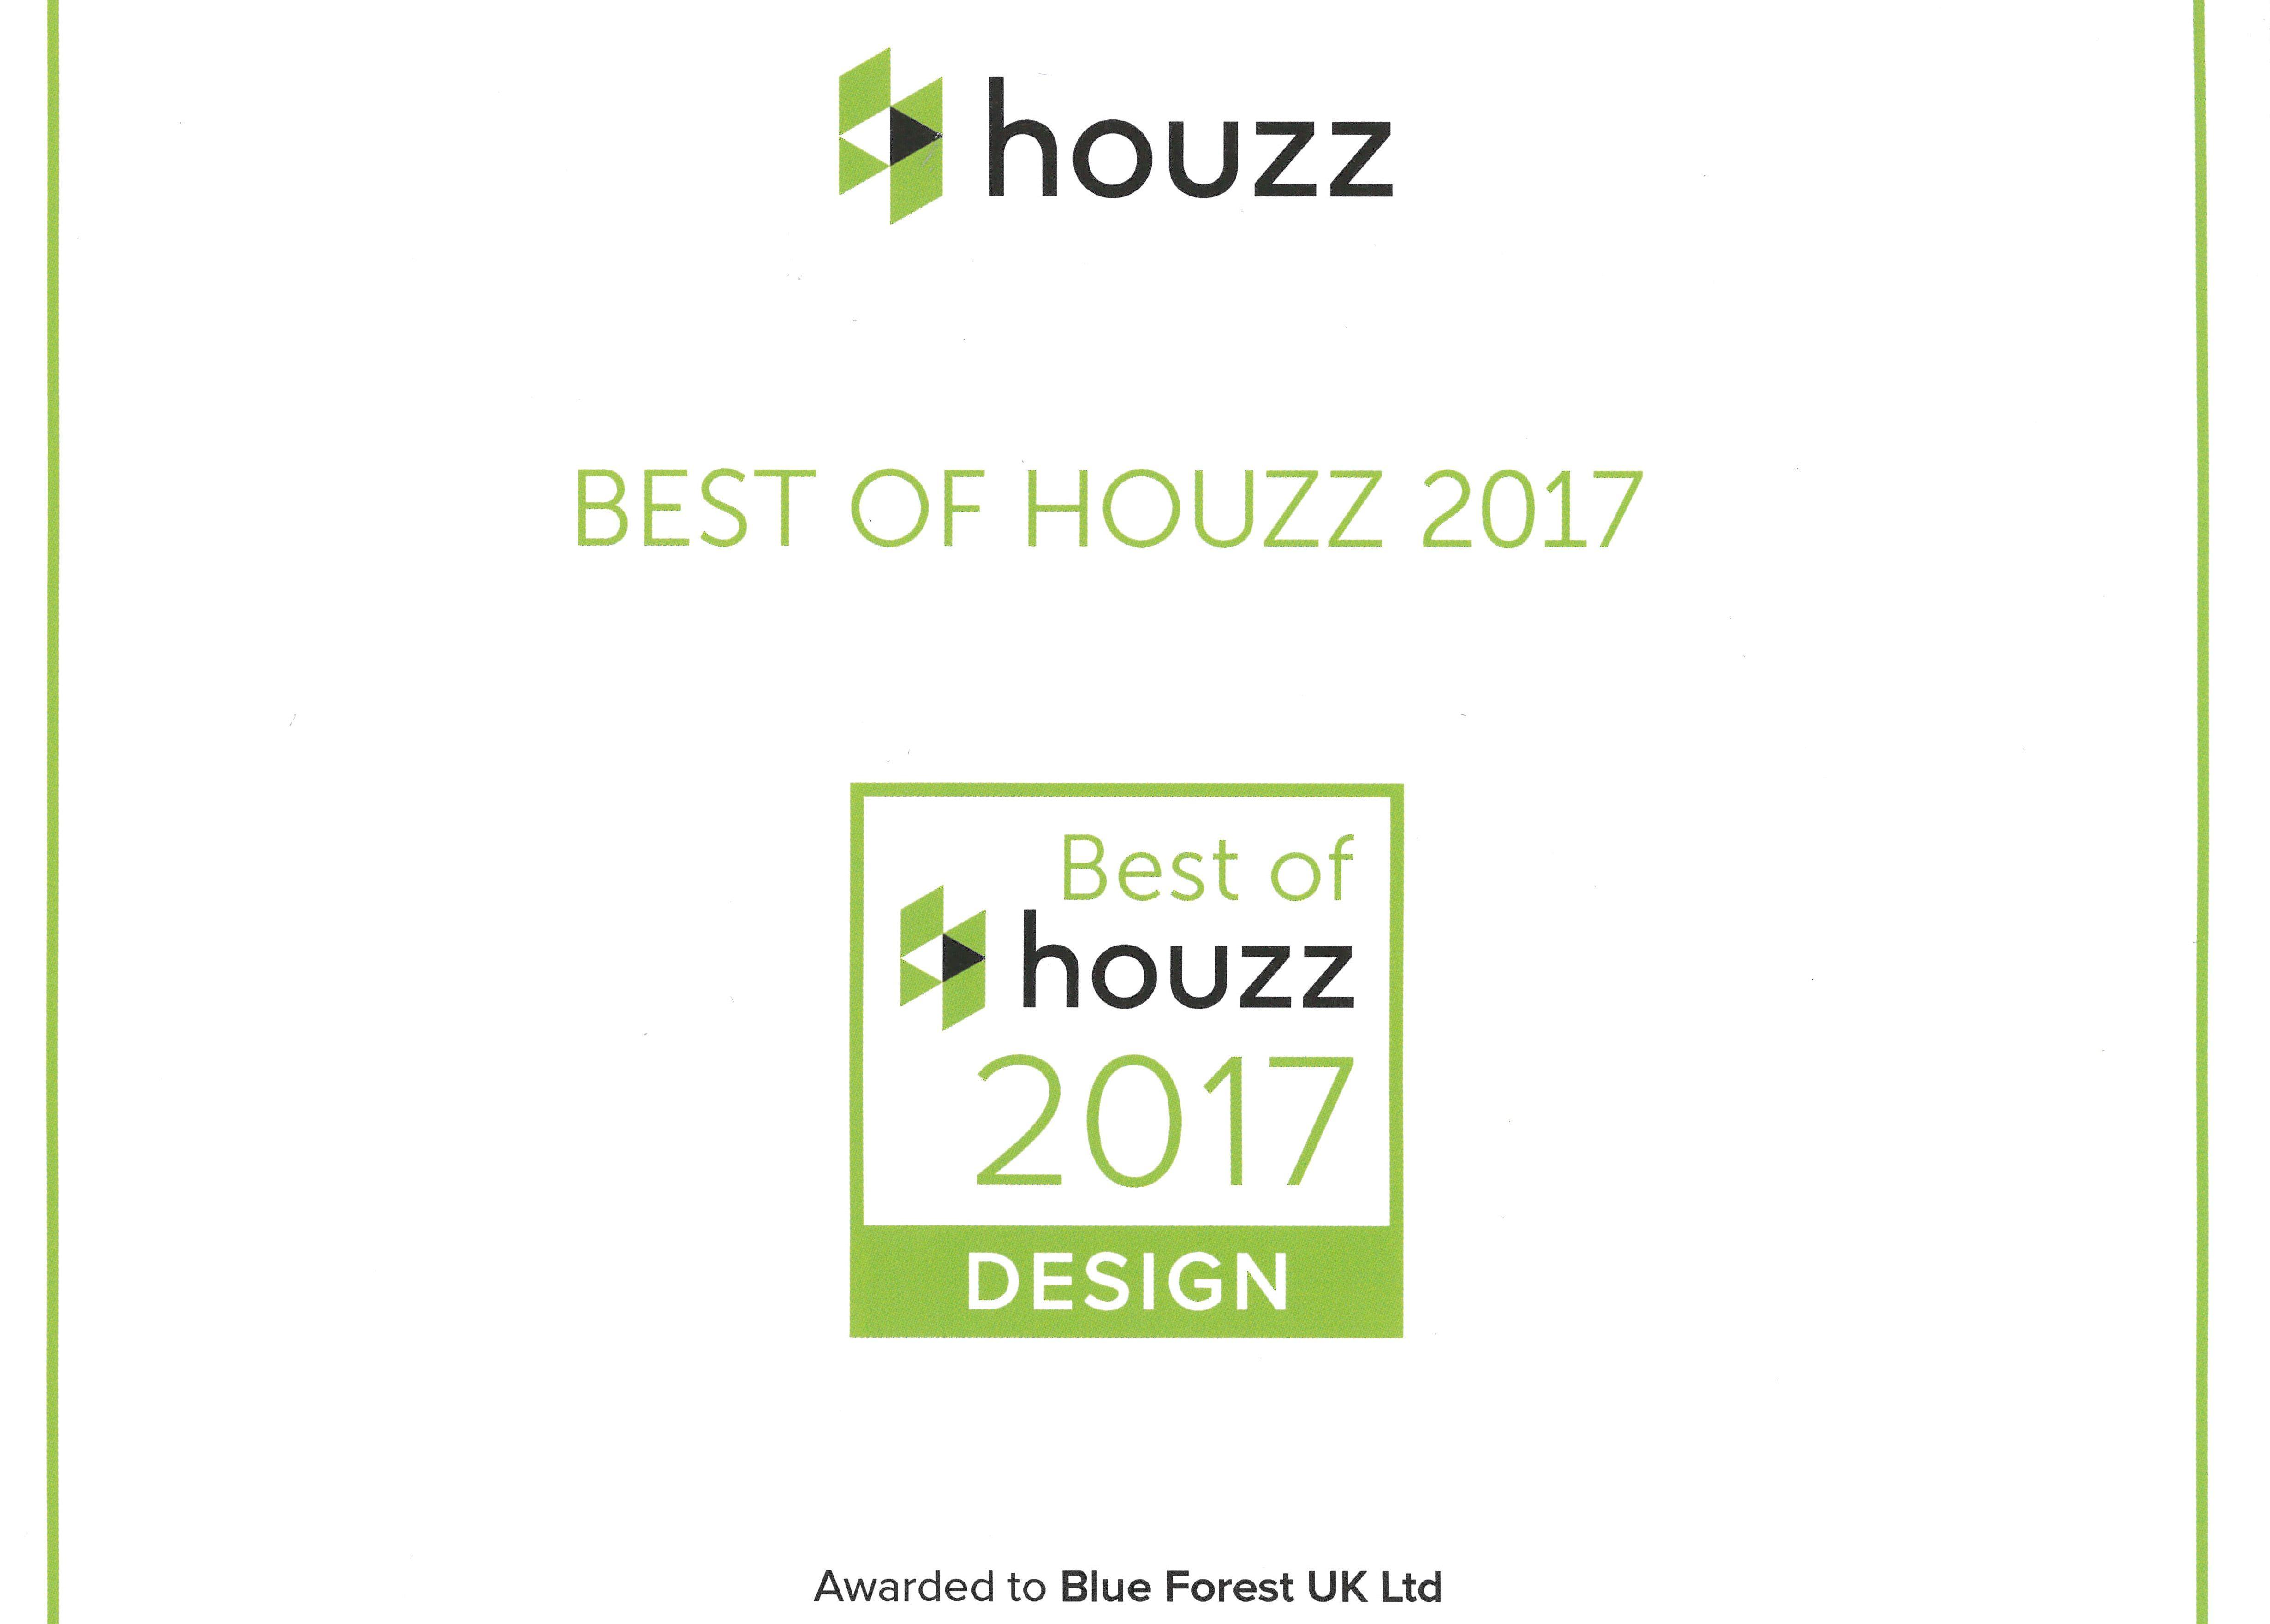 Houzz Small Logo - Blue Forest Treehouses Win Best Of Houzz 2017 for Design!